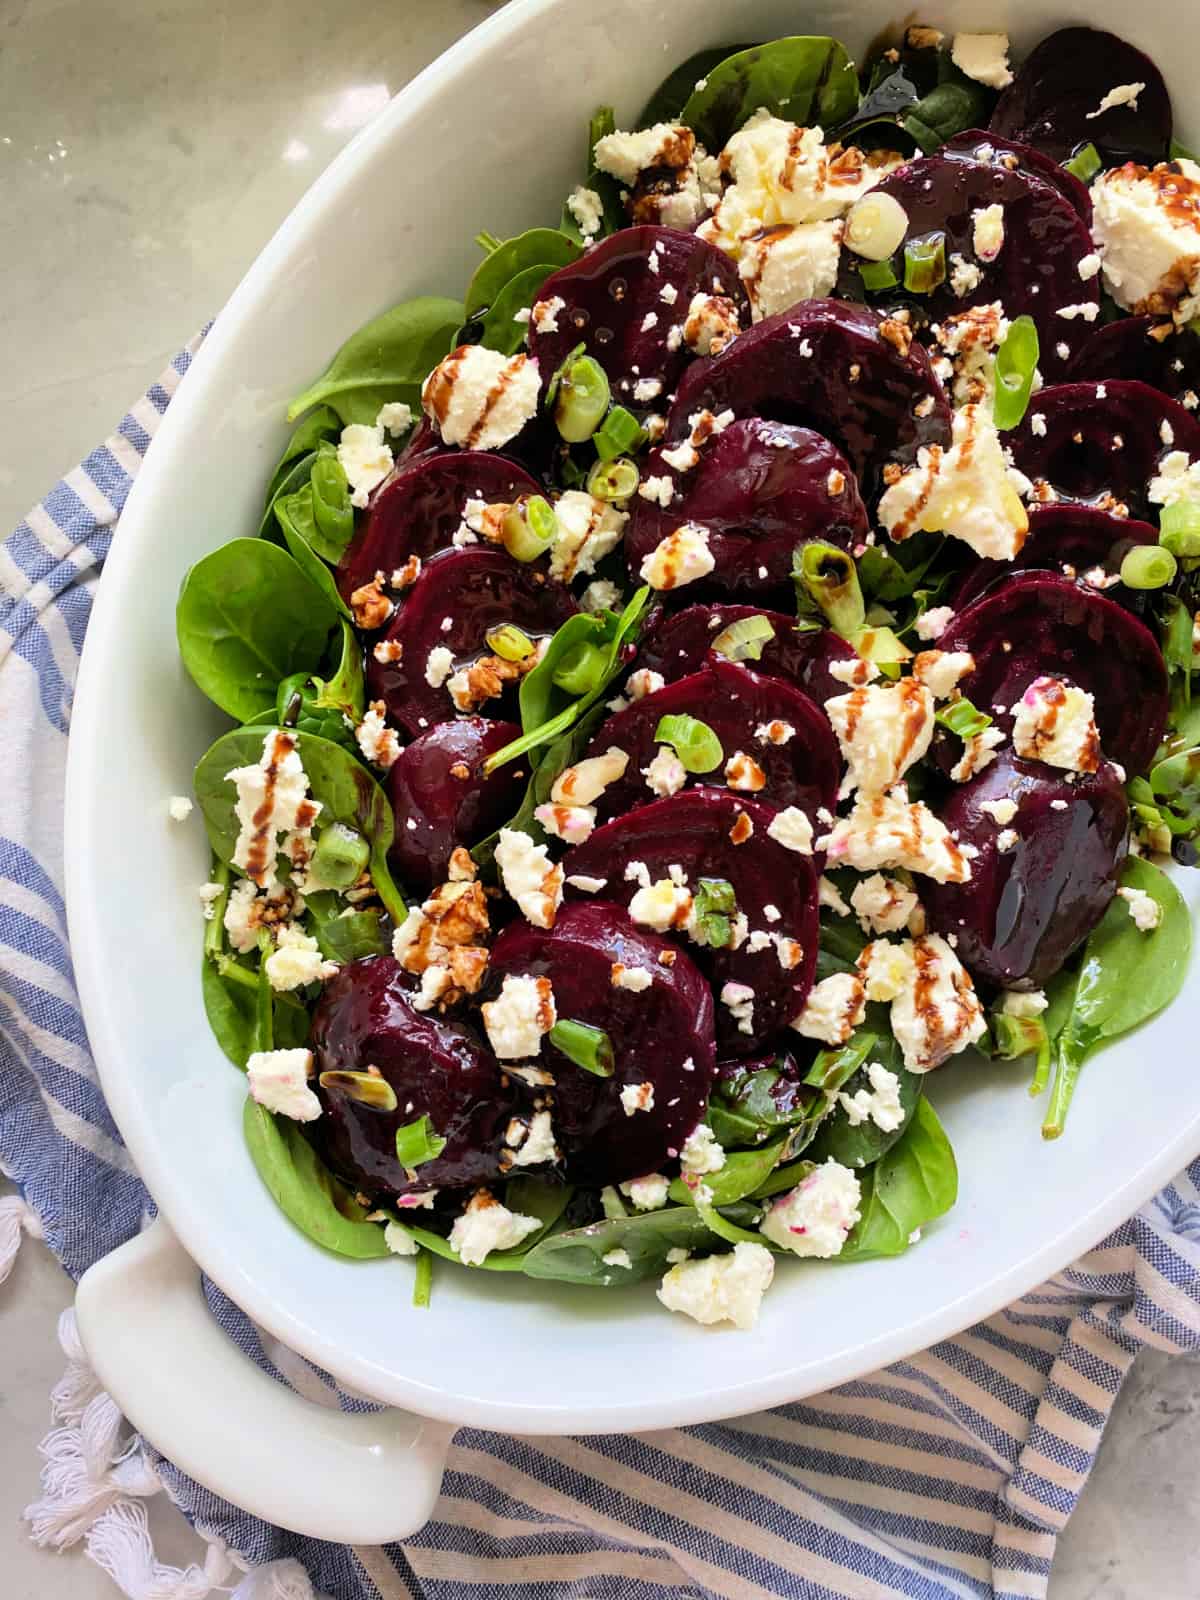 Oval bowl filled with feta, beets, and spinach on a white and blue striped cloth.